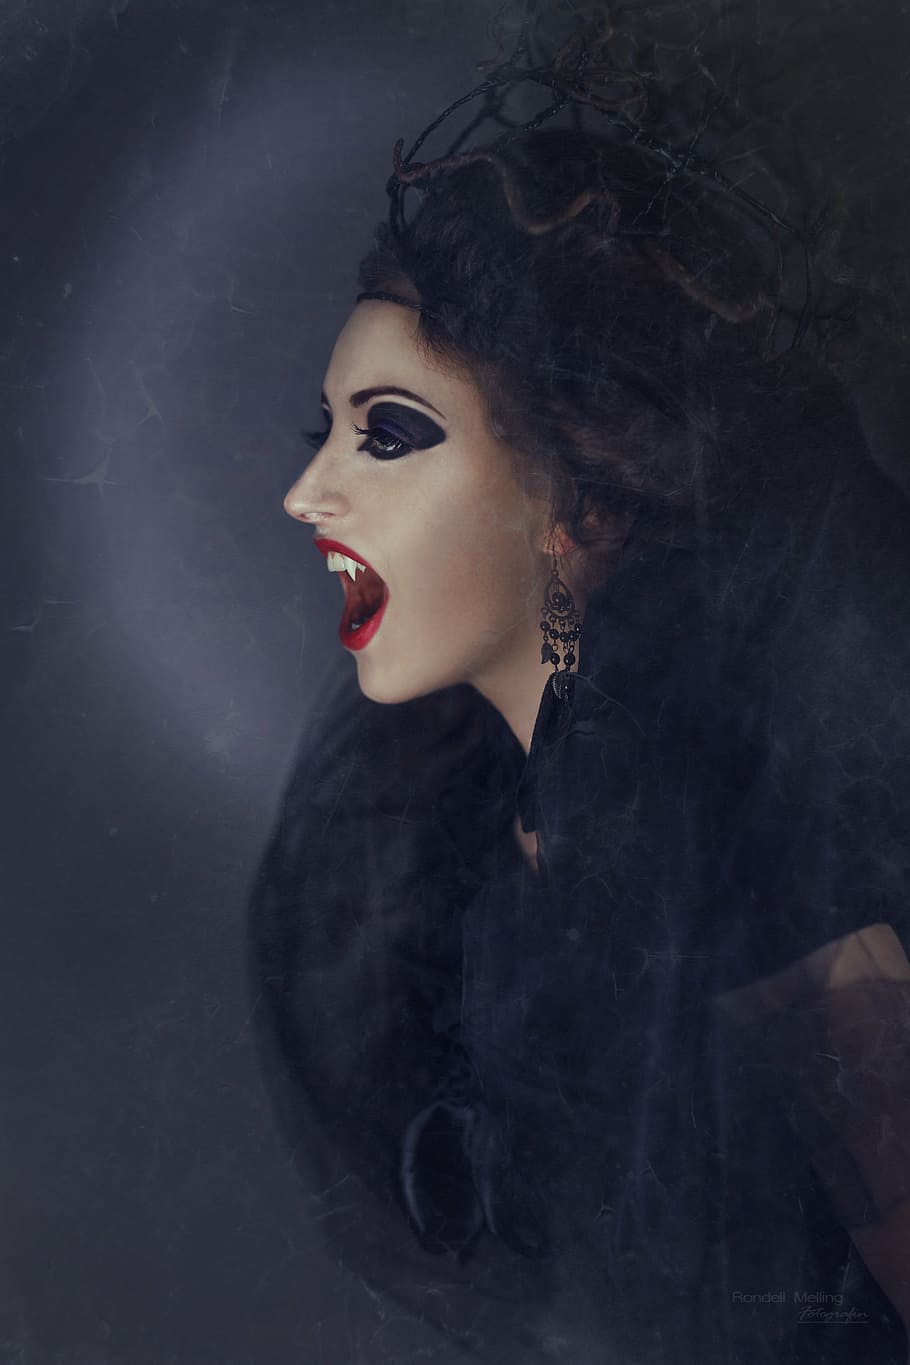 vampire woman, wearing, black, top, vampire, creepy, the witch, sorceress, mystical, fairytale